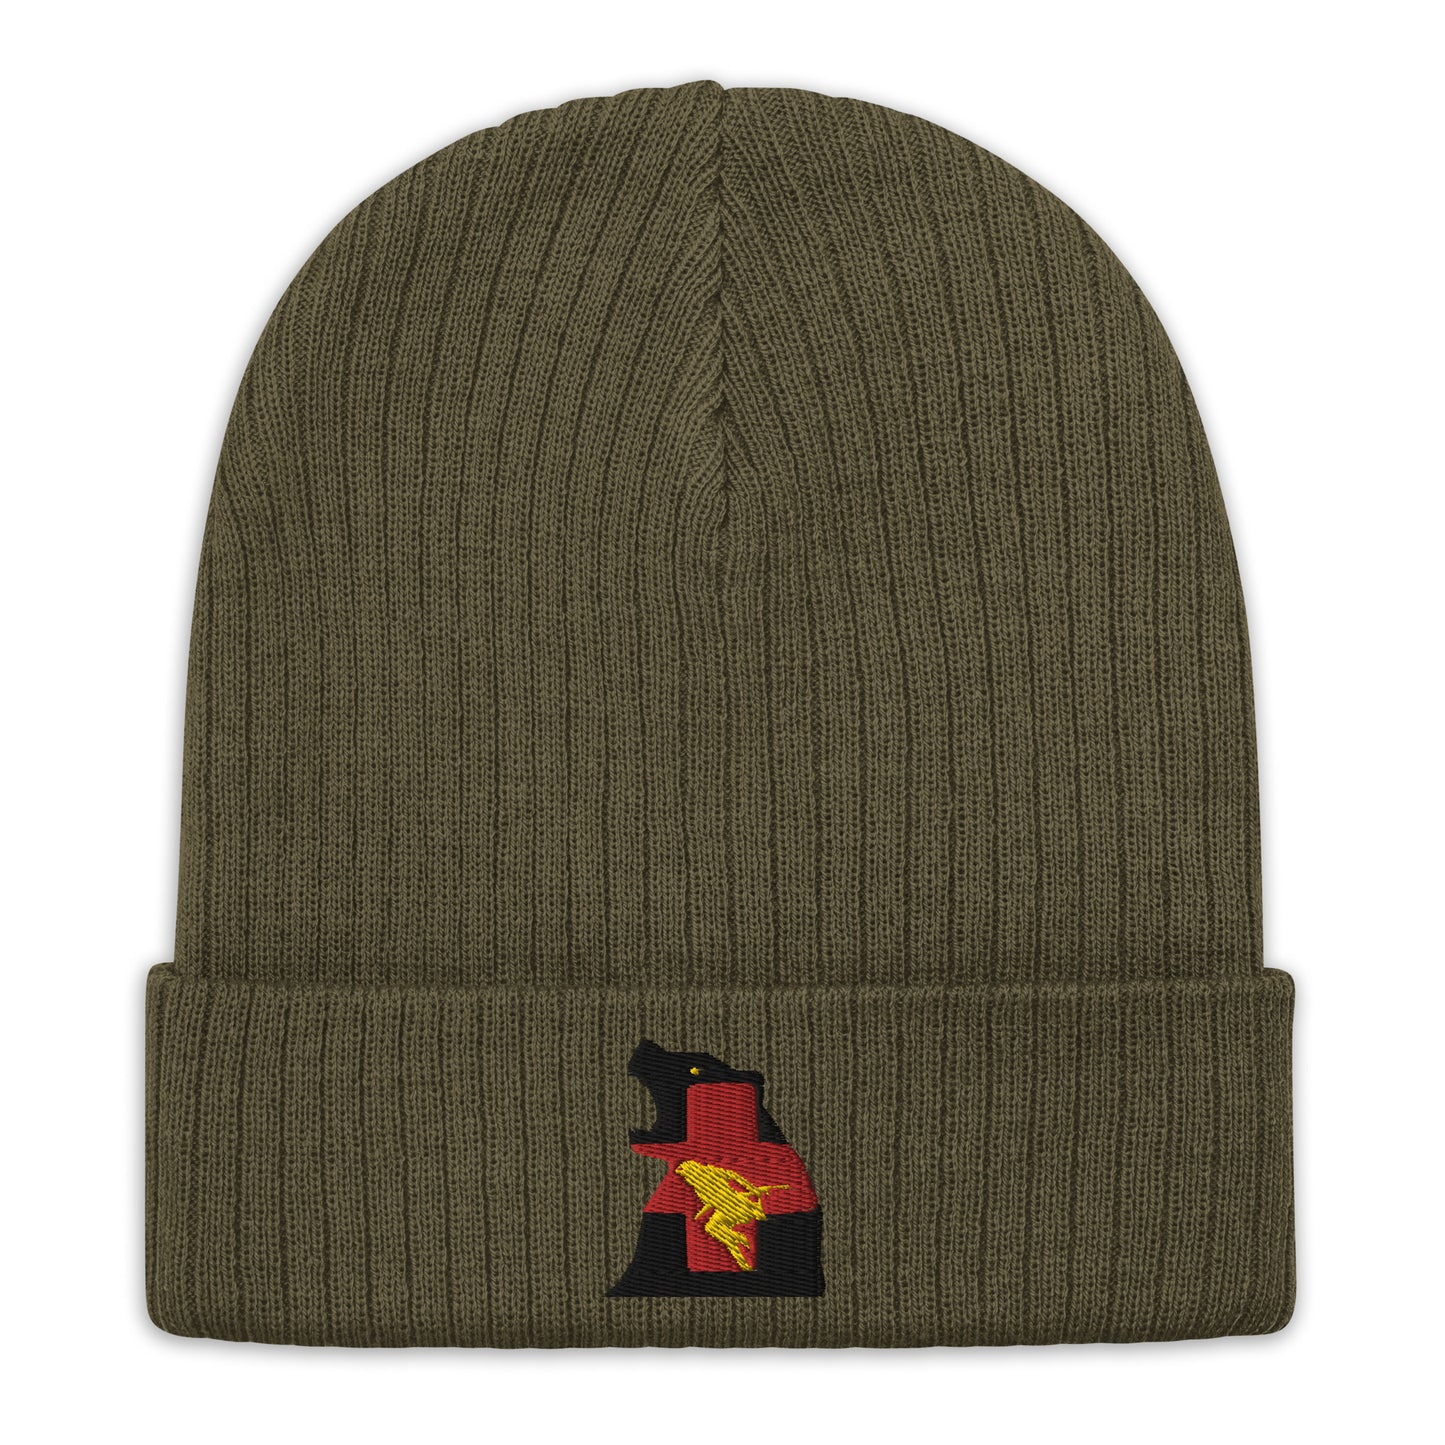 Synthetic Knit Beanie